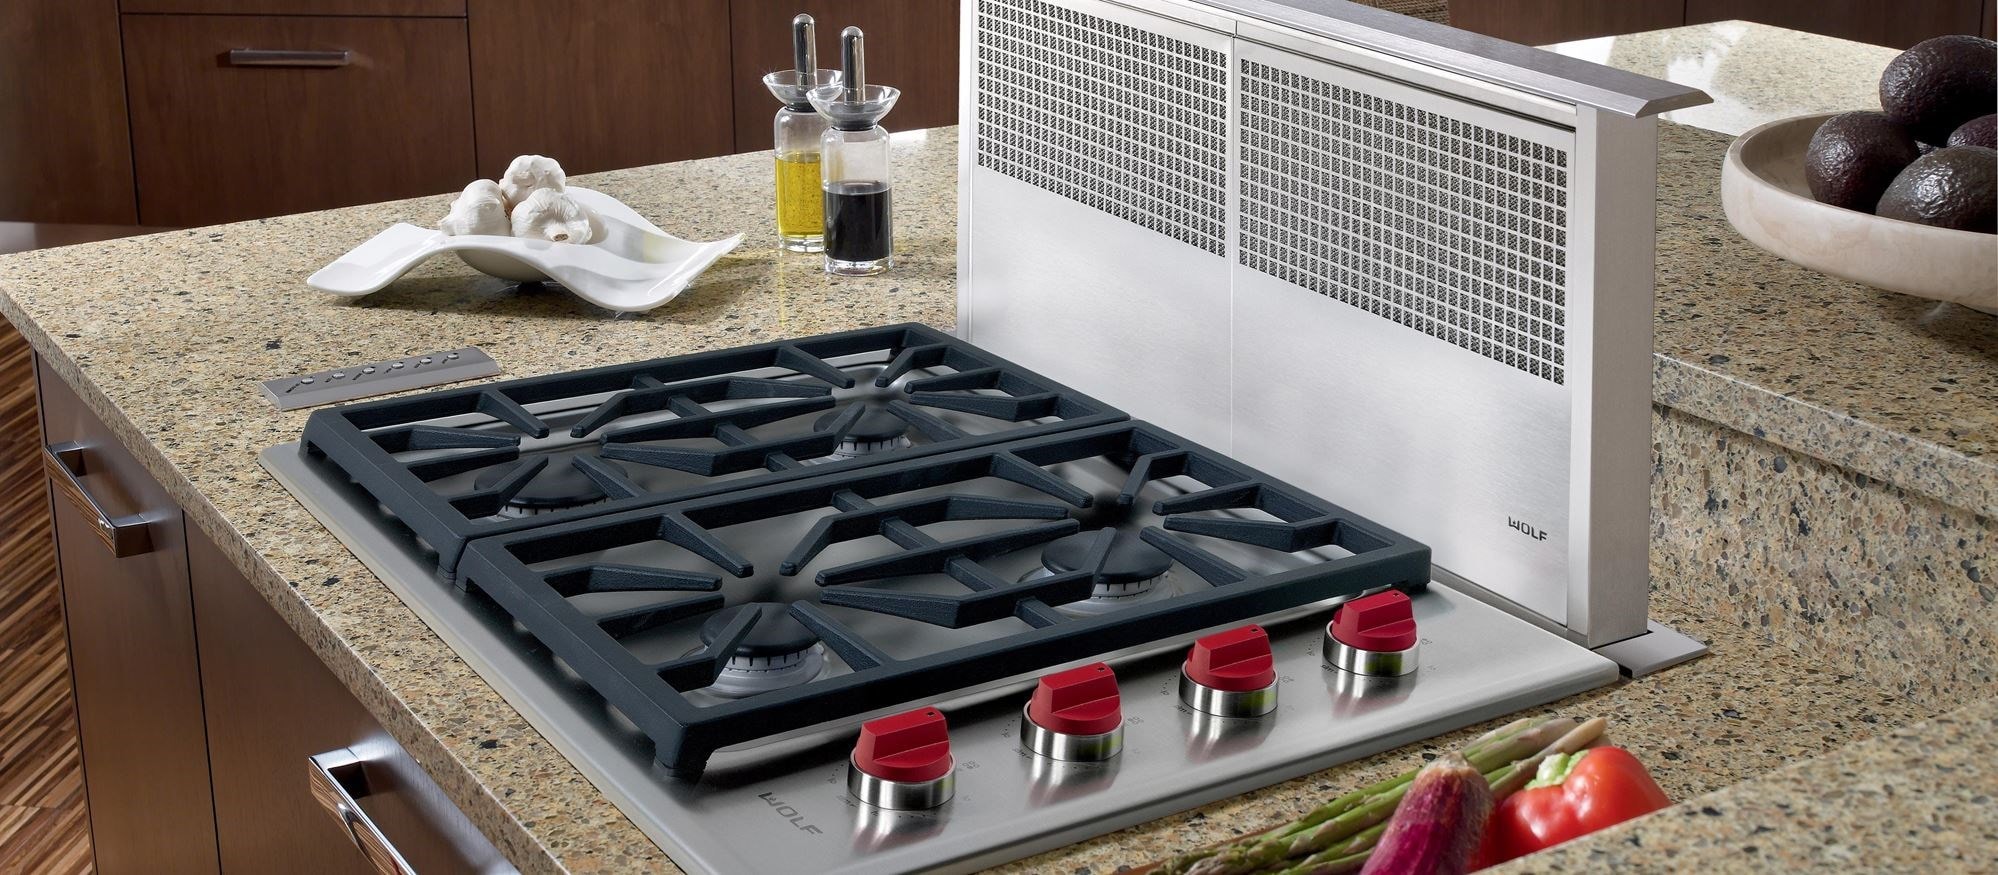 30 5 Burners Built-In Gas Stove Top Cooktop Burner Kitchen Cooktop Gas  Cooking